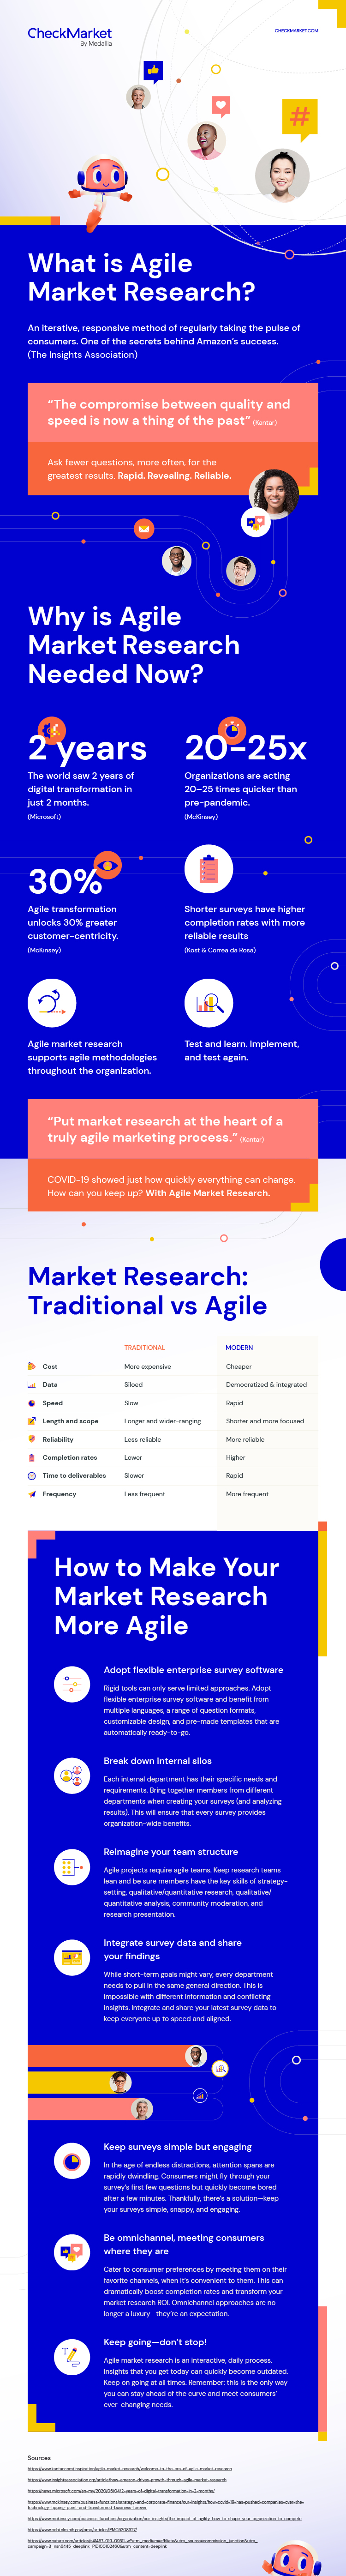 agile market research infographic